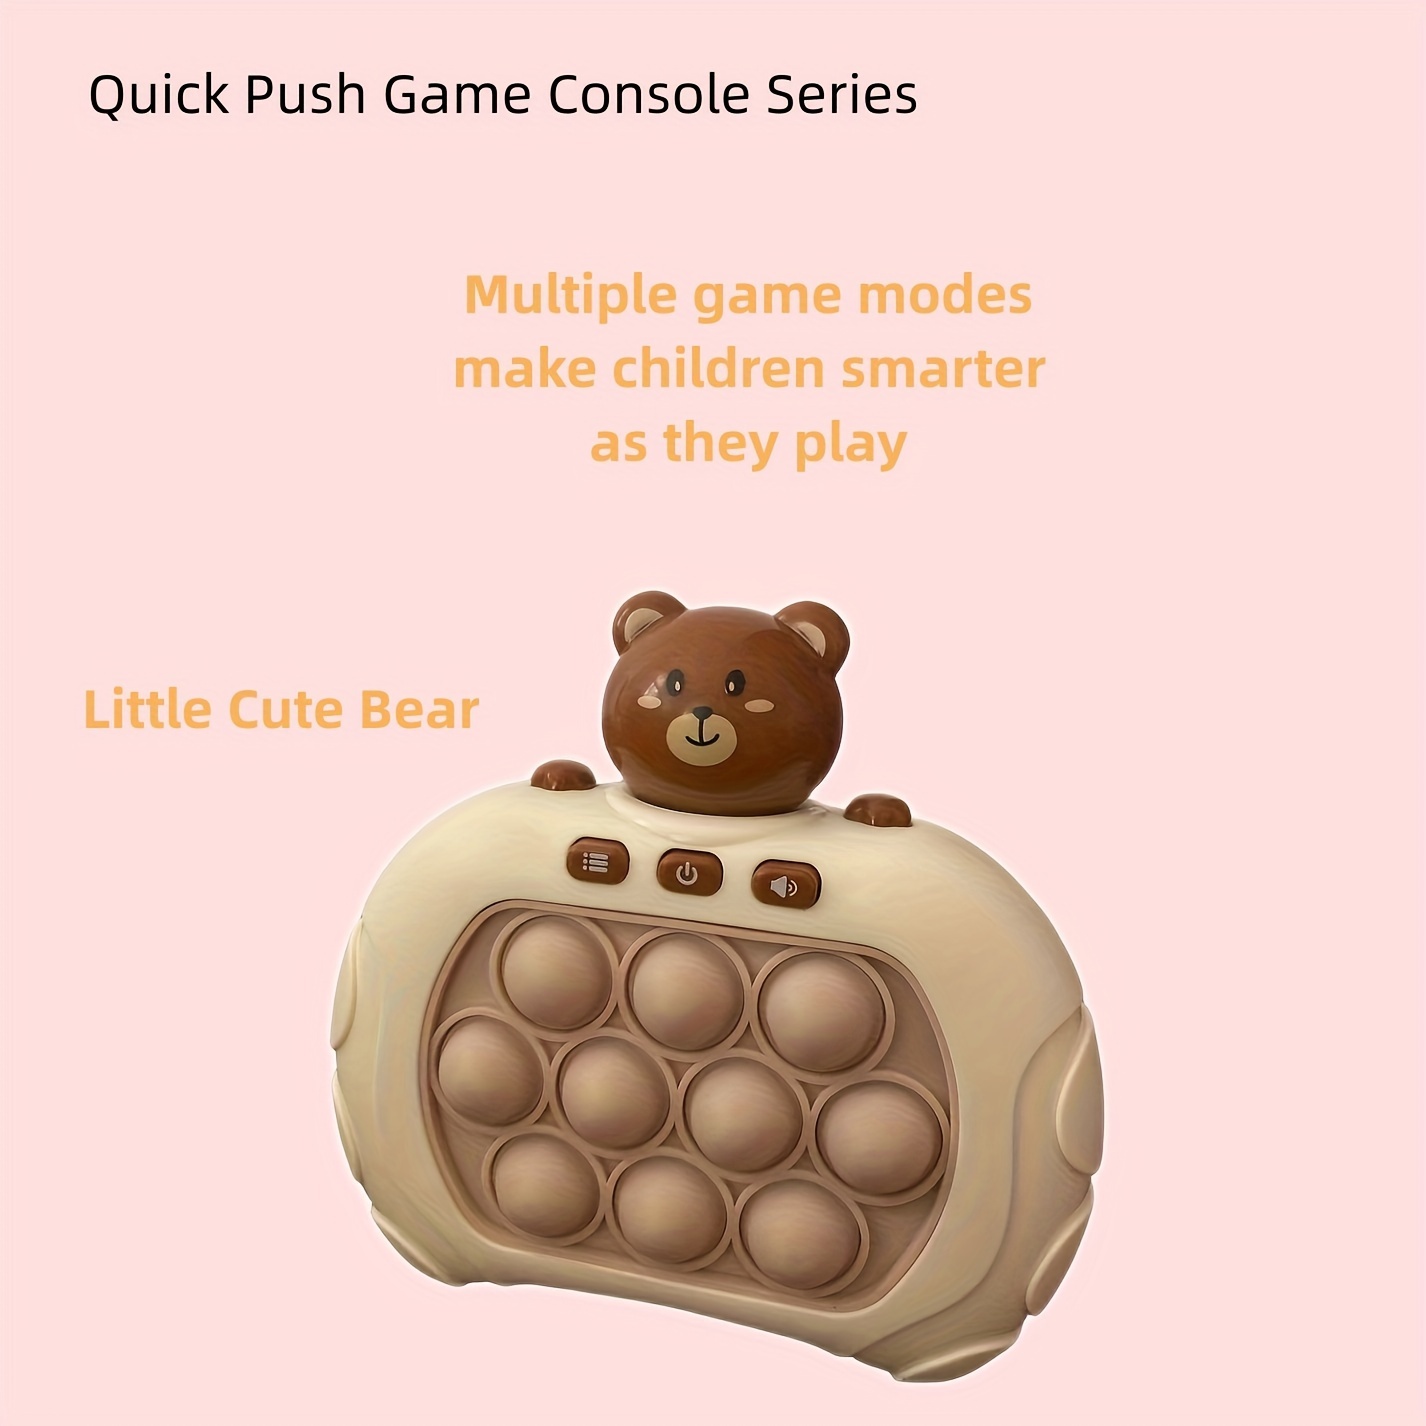 Pop Quick Push Game Console Series Toys for Kids, Interesting Push